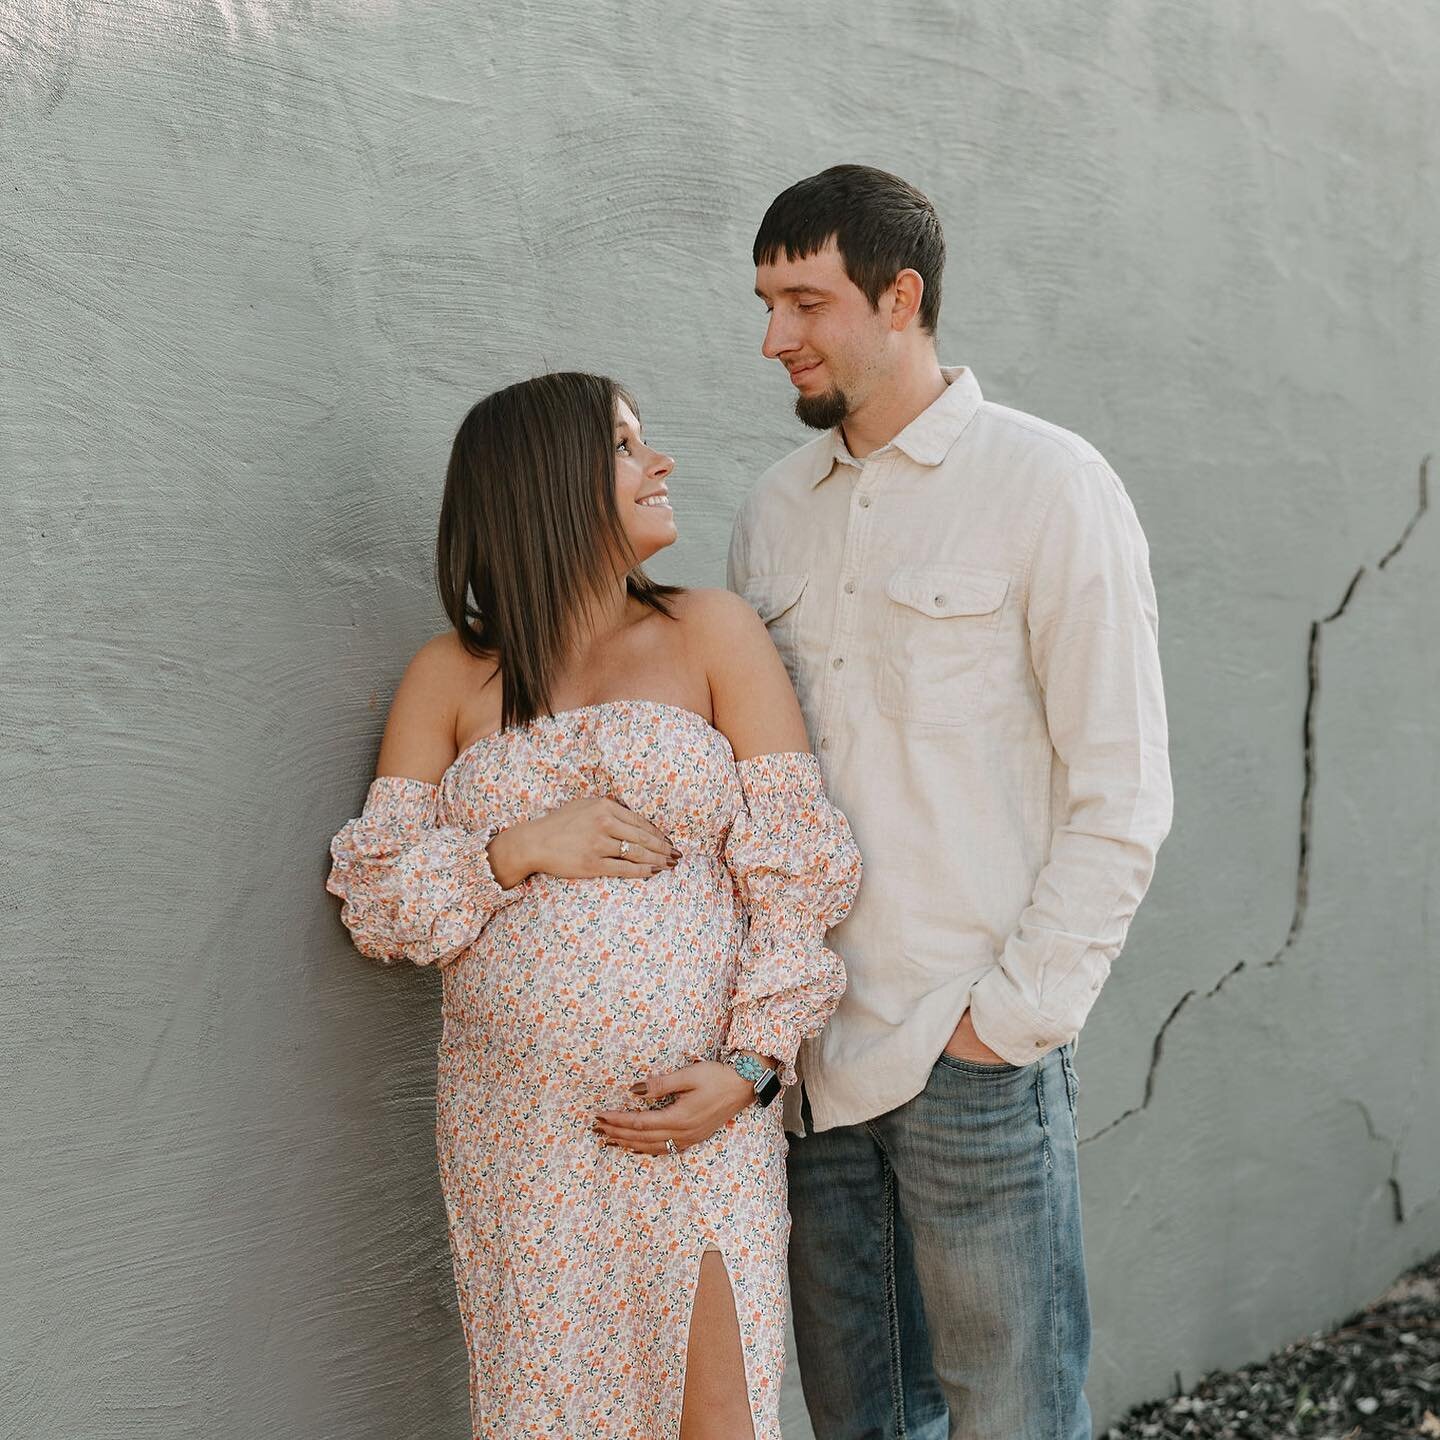 So excited for these two to welcome their sweet little girl next month ❤️❤️